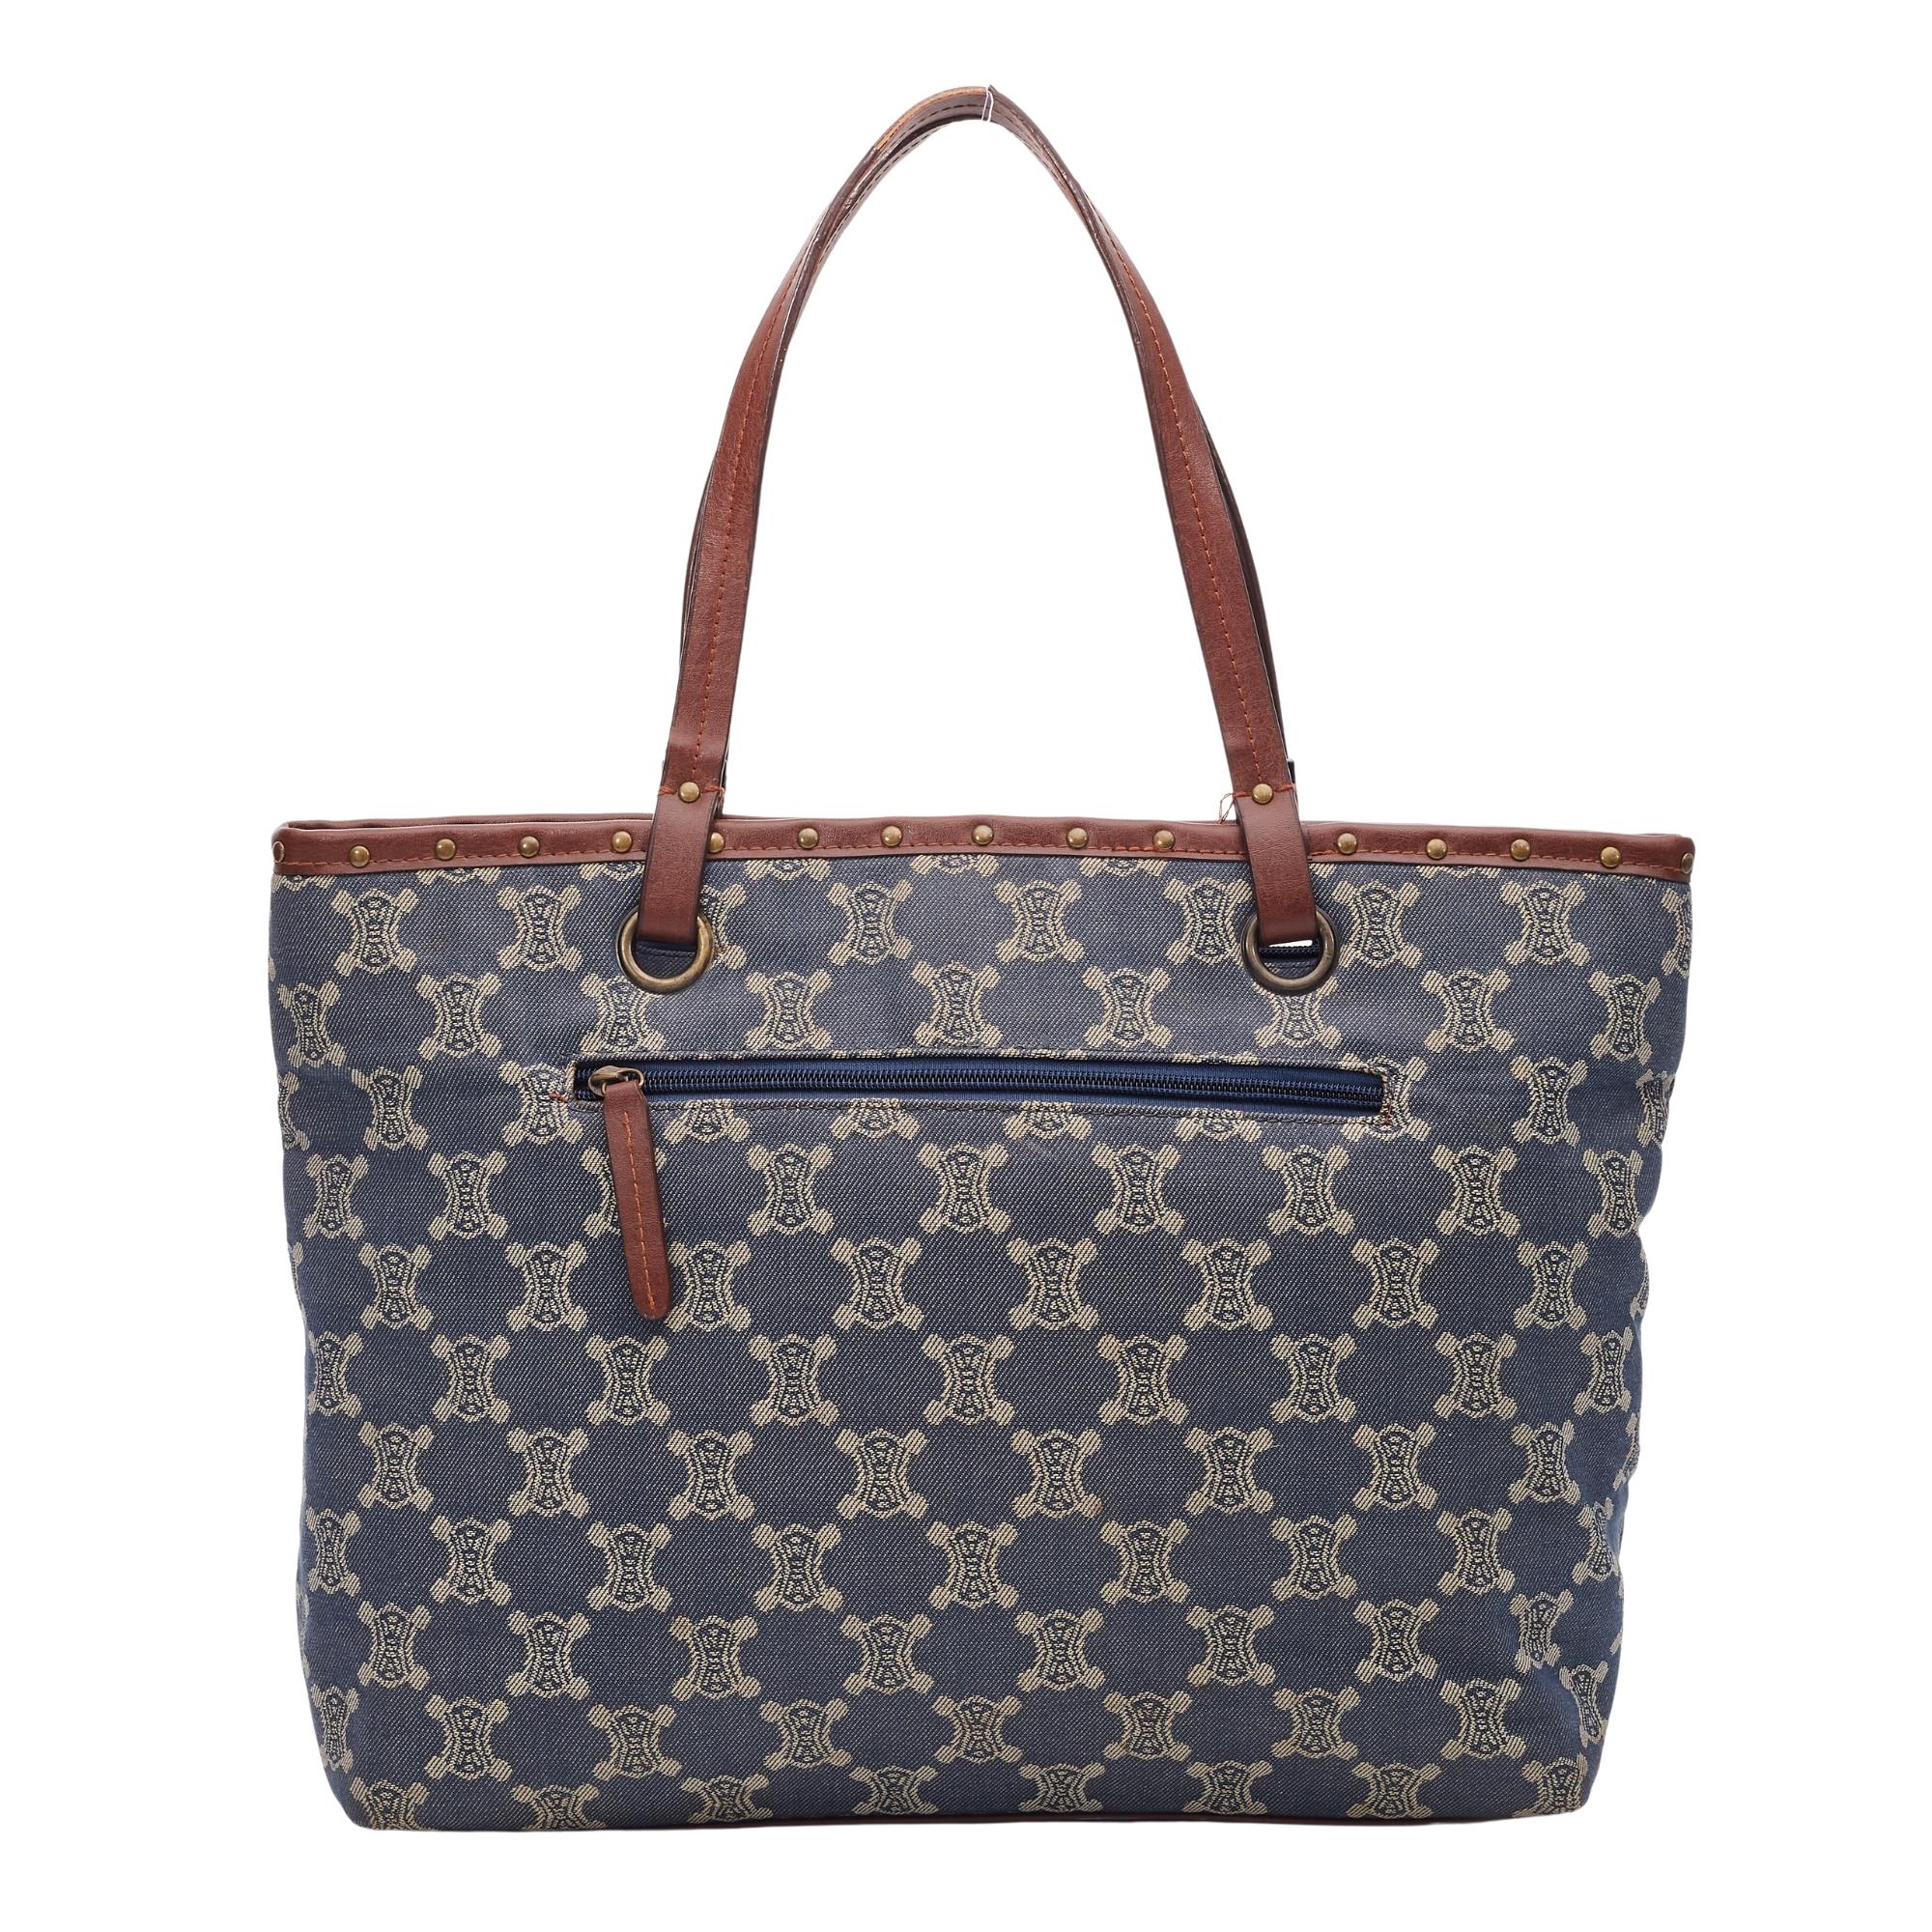 Dark wash blue and creme embroidered denim Céline tote with antiqued gold-tone hardware, brown leather trim, dual flat shoulder straps, stud embellishments throughout, tonal denim interior. single zip pocket at interior wall and open top.

Color: